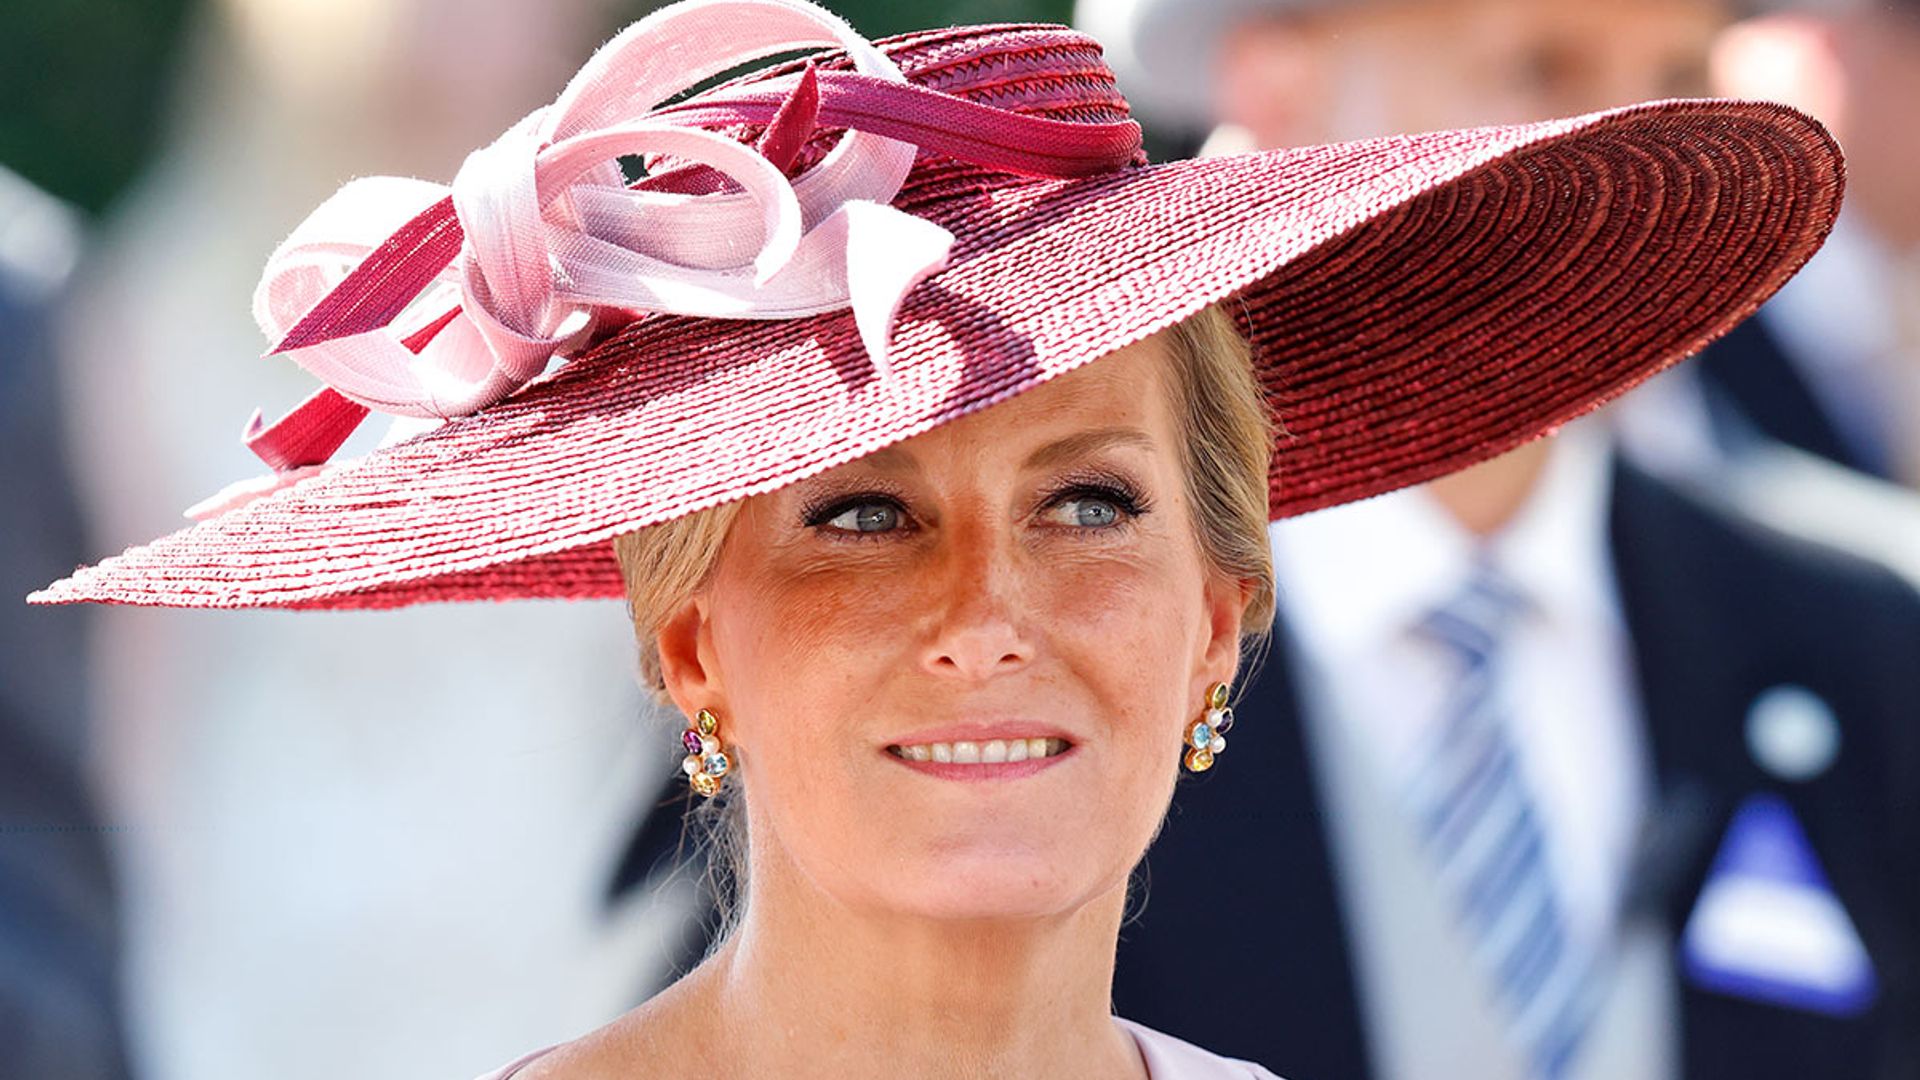 The Countess of Wessex wears the most flattering summer dress we've ever seen